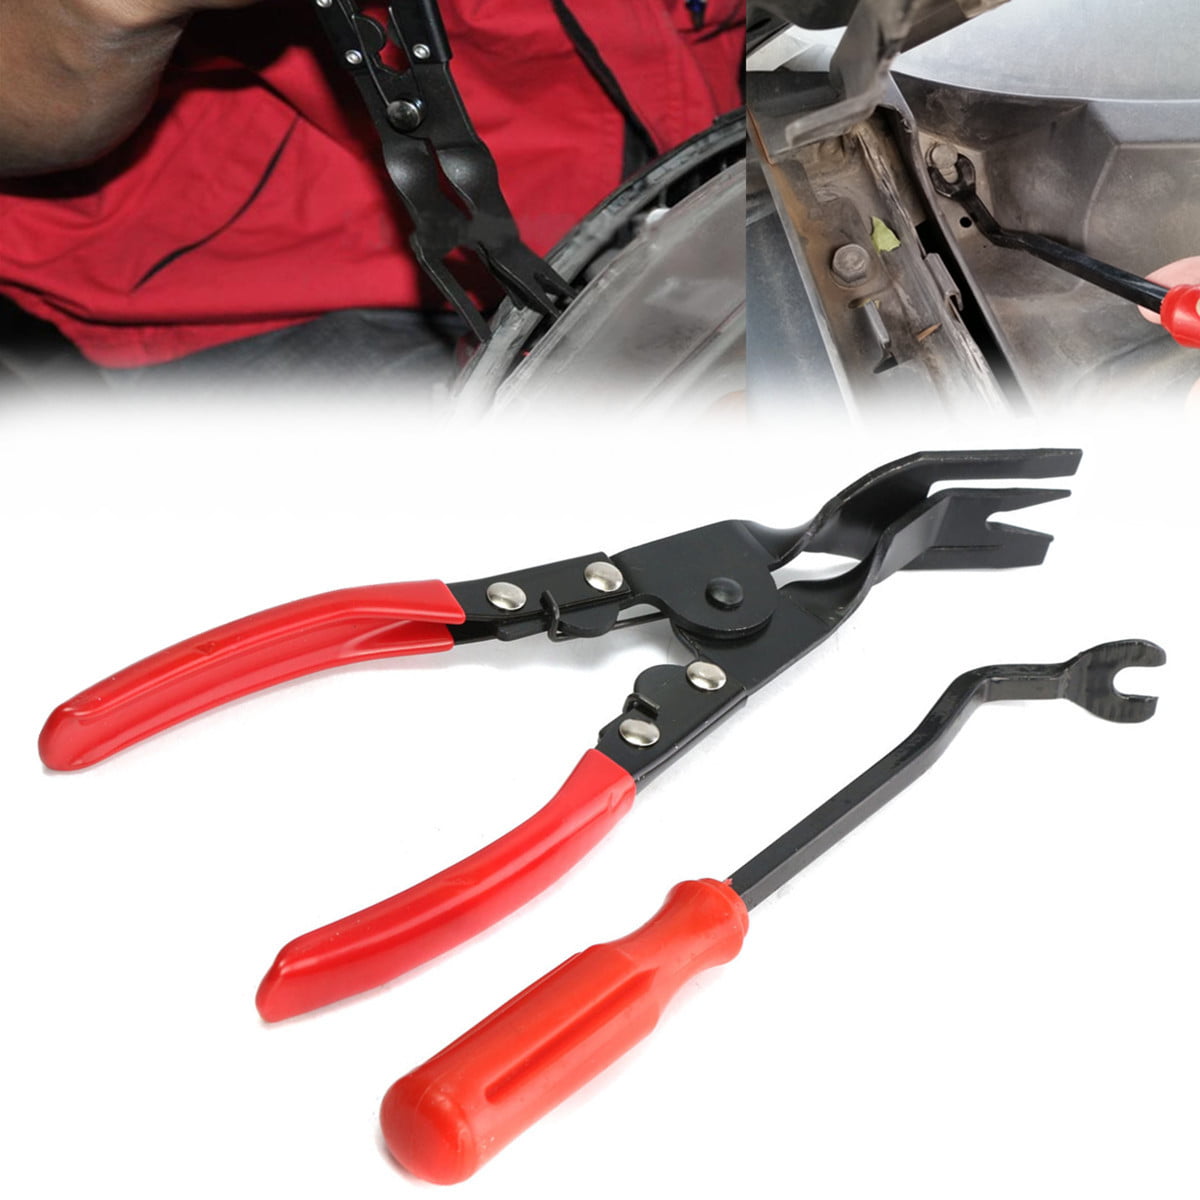 Details about   4pc Car Door Upholstery Remover Pry Bar & Panel Trim Clip Removal Plier Tool Set 